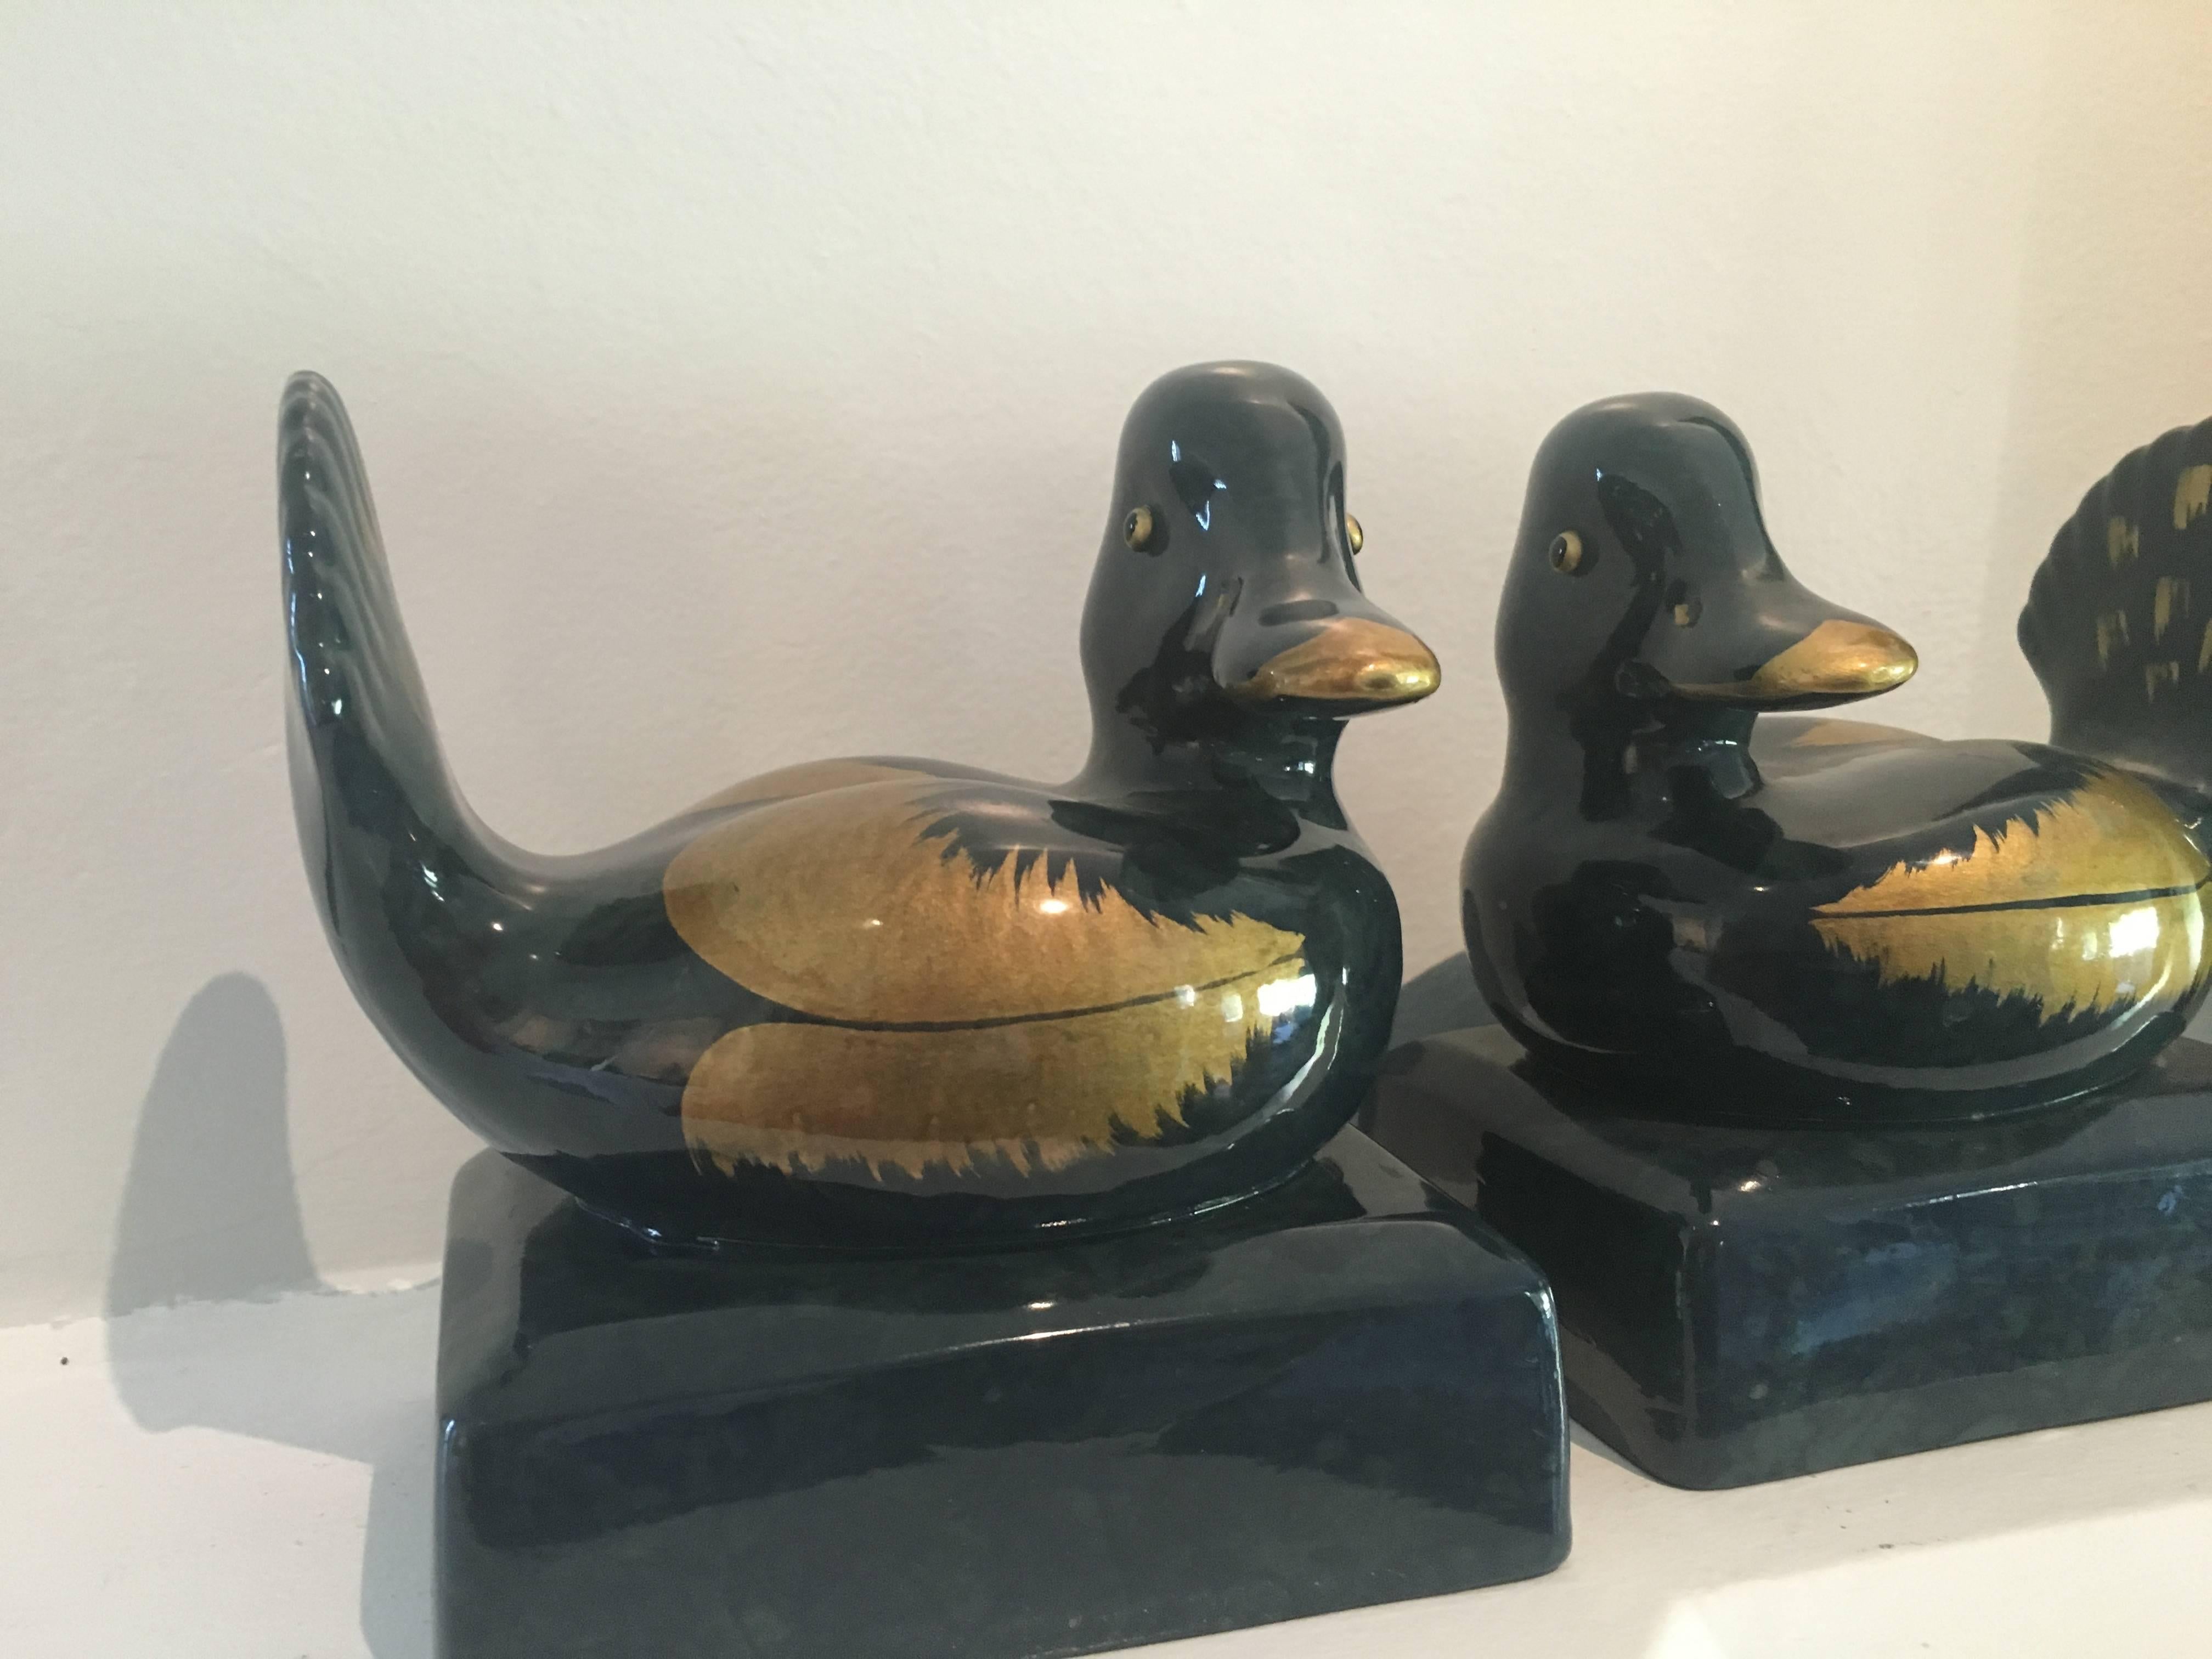 Large and of nice weight, this pair of duck bookends are Italian ceramic and marked 